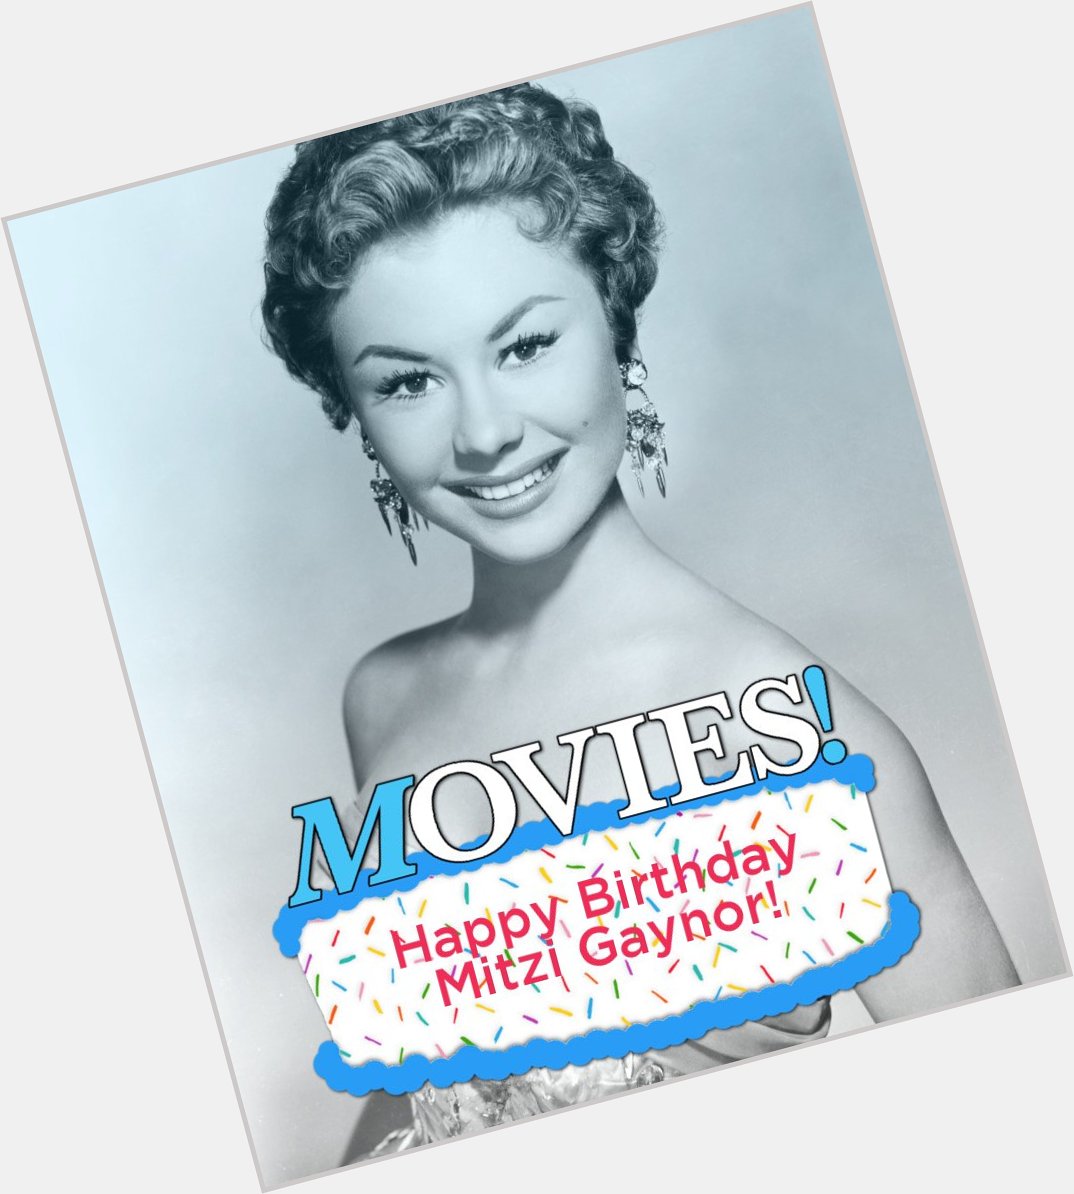 Happy Birthday Mitzi Gaynor!

Here she is in THERE\S NO BUSINESS LIKE SHOW BUSINESS. 